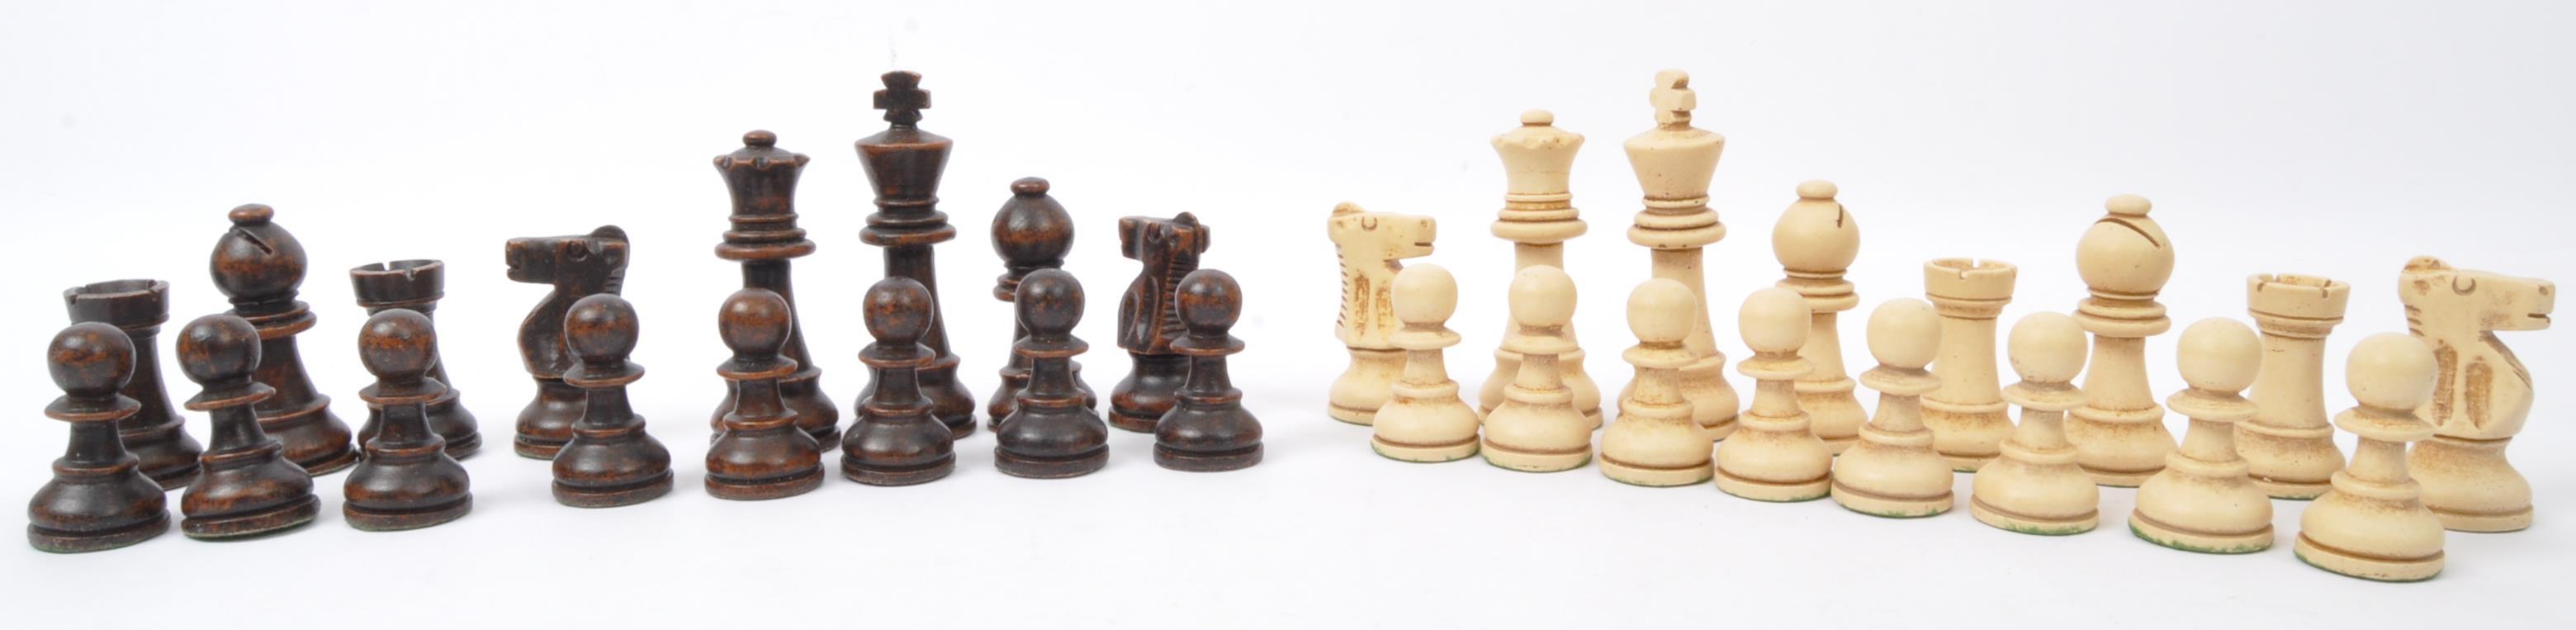 COLLECTION OF VINTAGE TURNED WOOD CHESS PIECES - Image 12 of 19